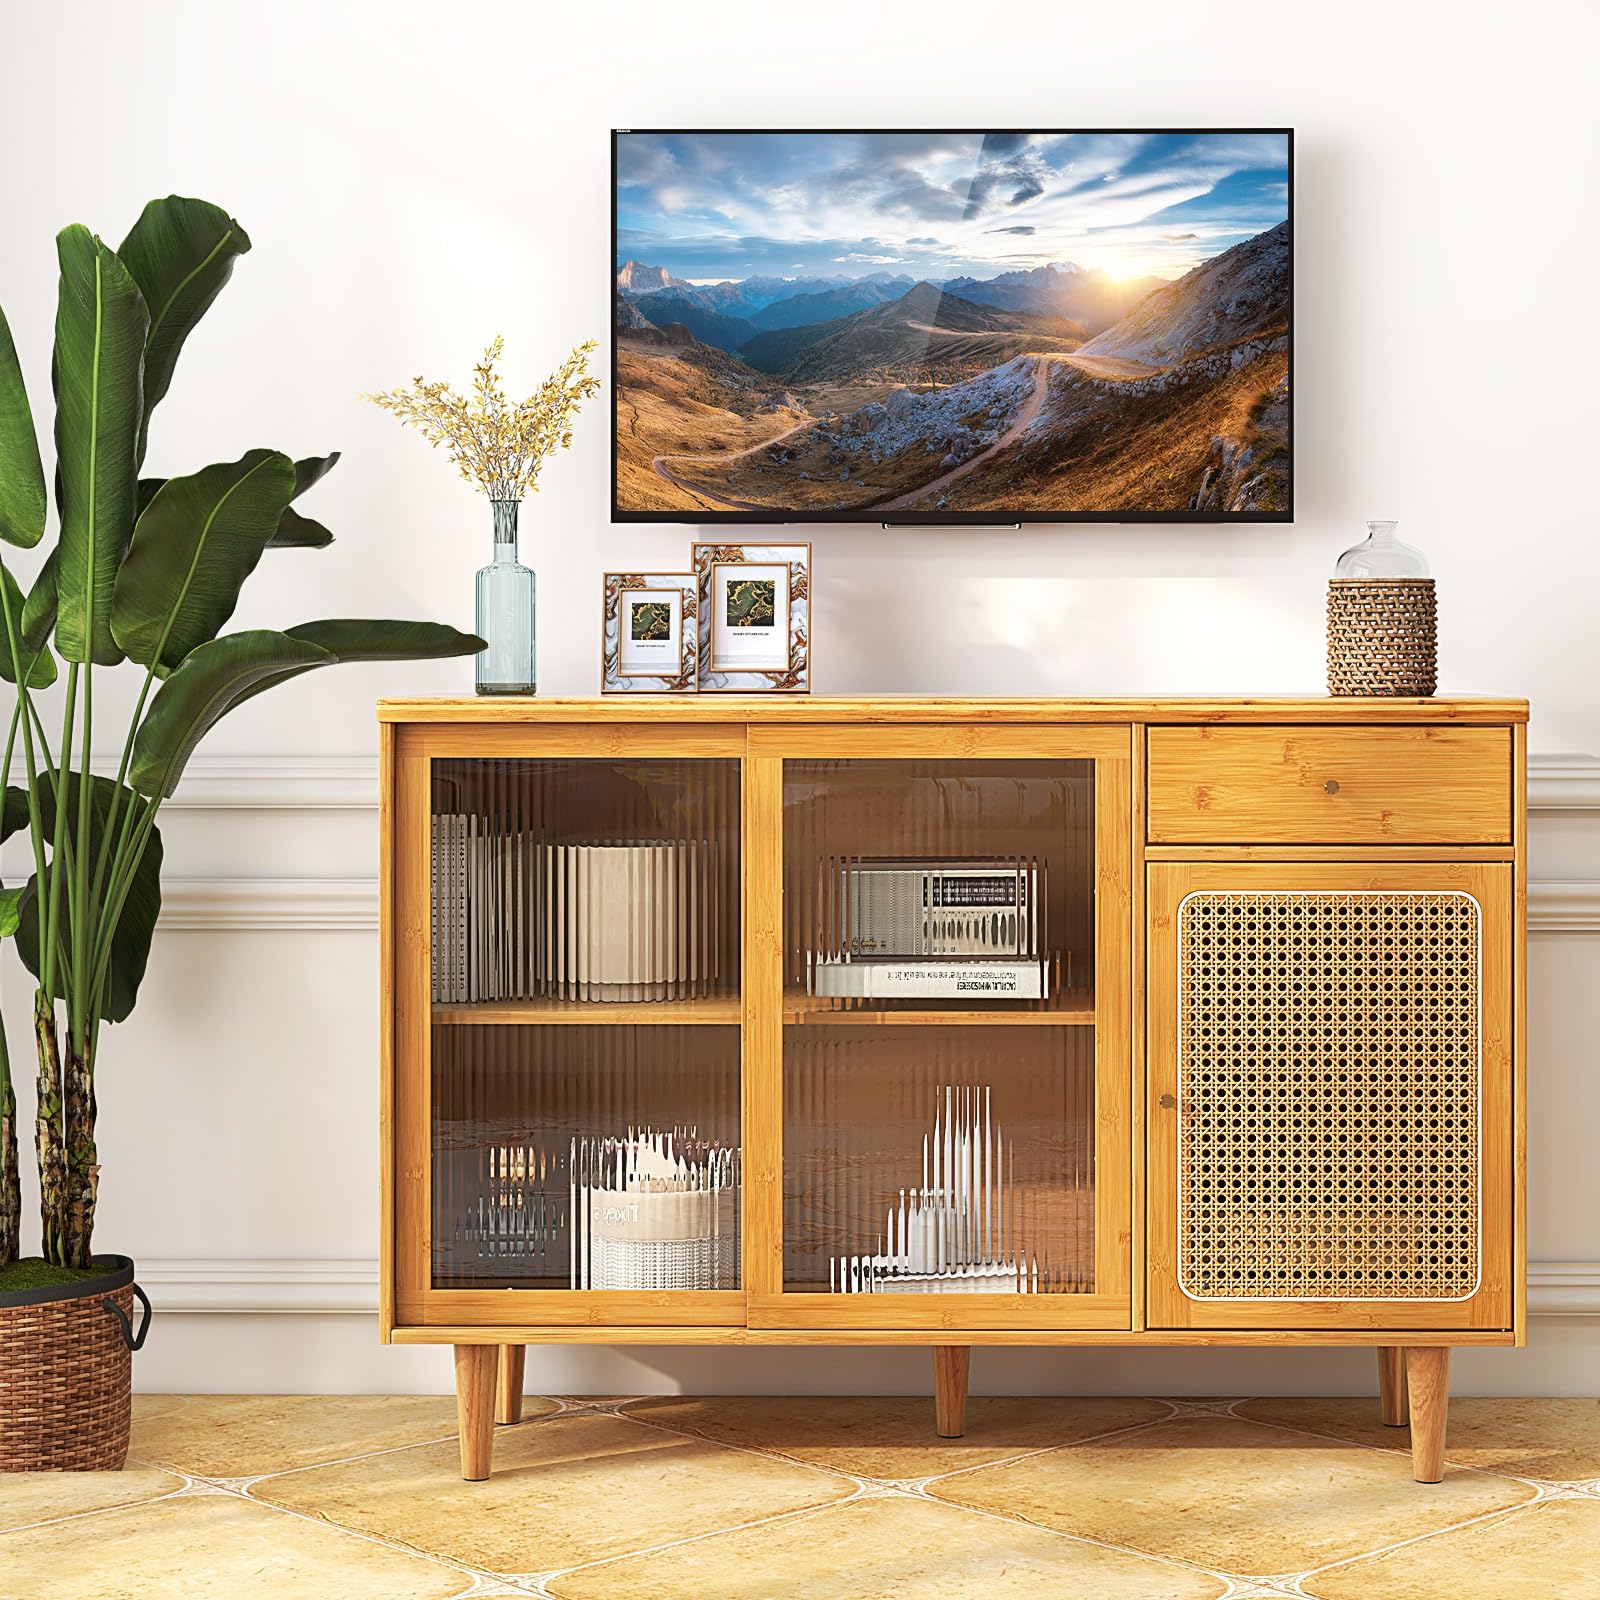 Giantex Sideboard, Bamboo Buffet Cabinet with Storage